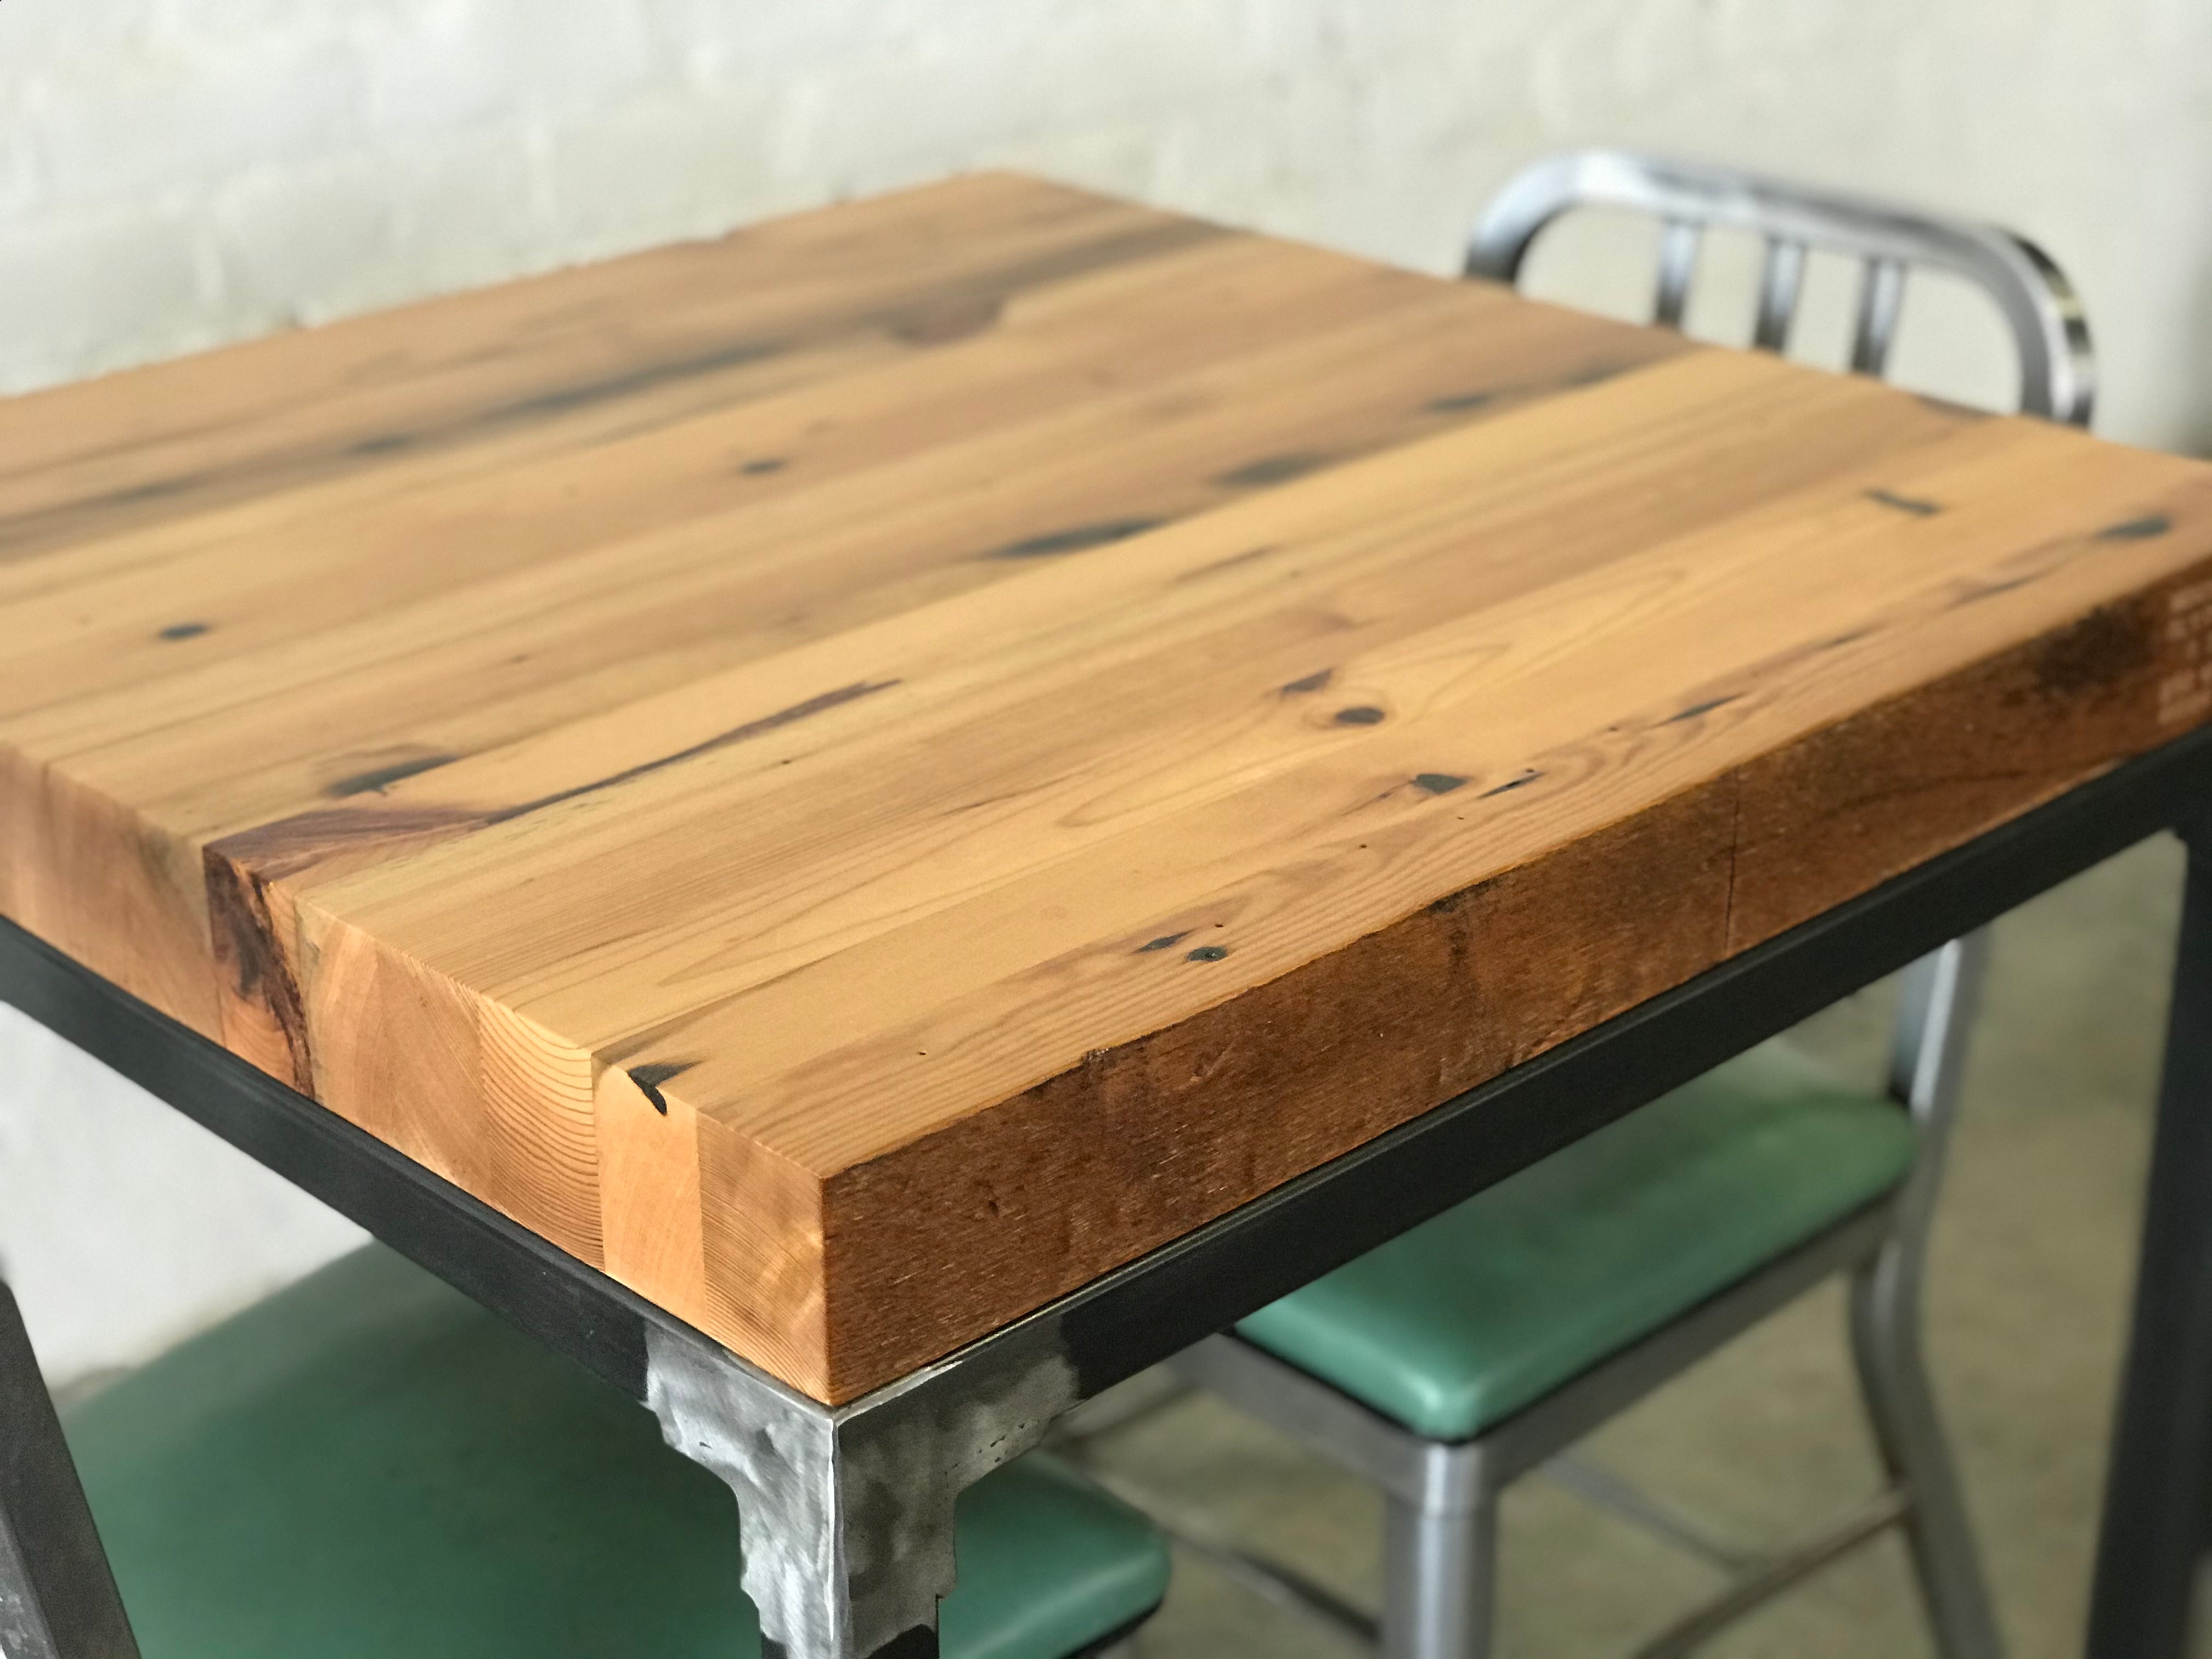 Grand Boulevard Industrial Cafe Table - READY TO SHIP